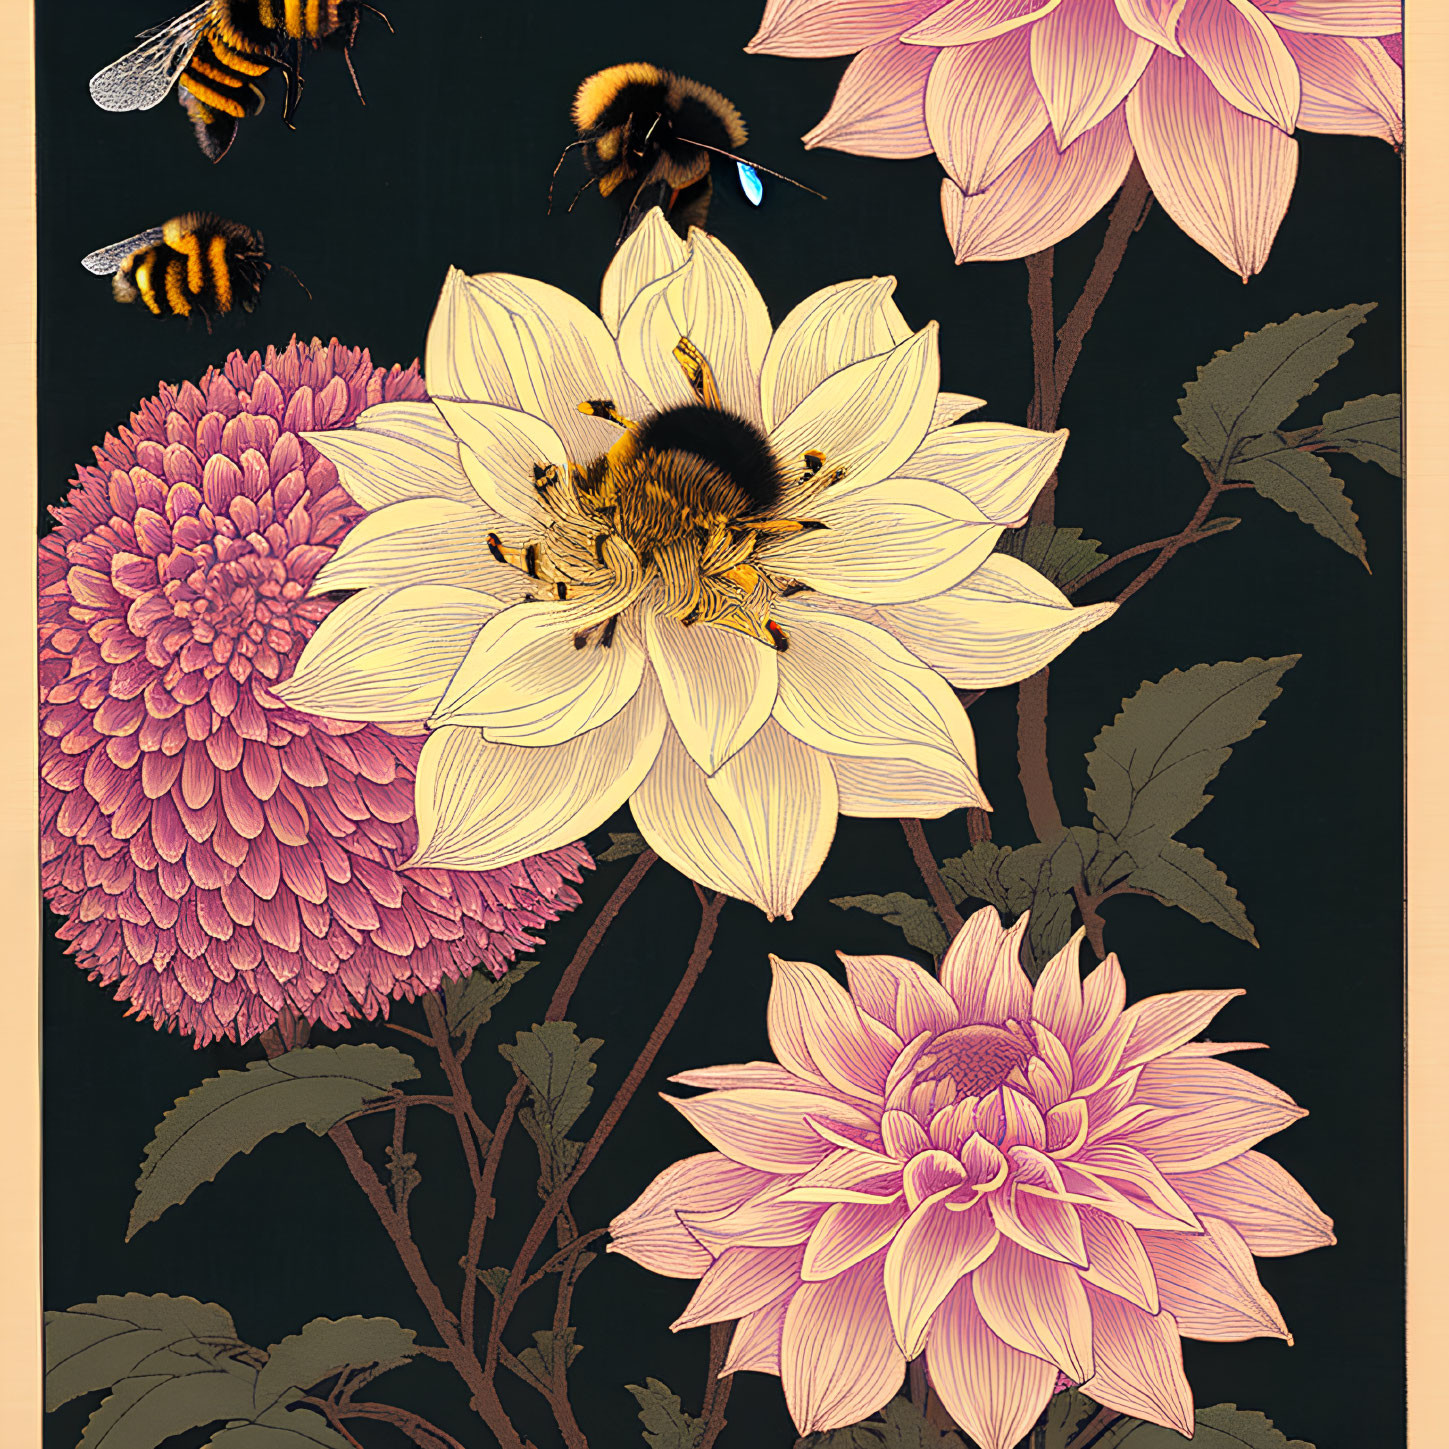 Detailed Pink Blooms and Bees Illustration on Dark Background